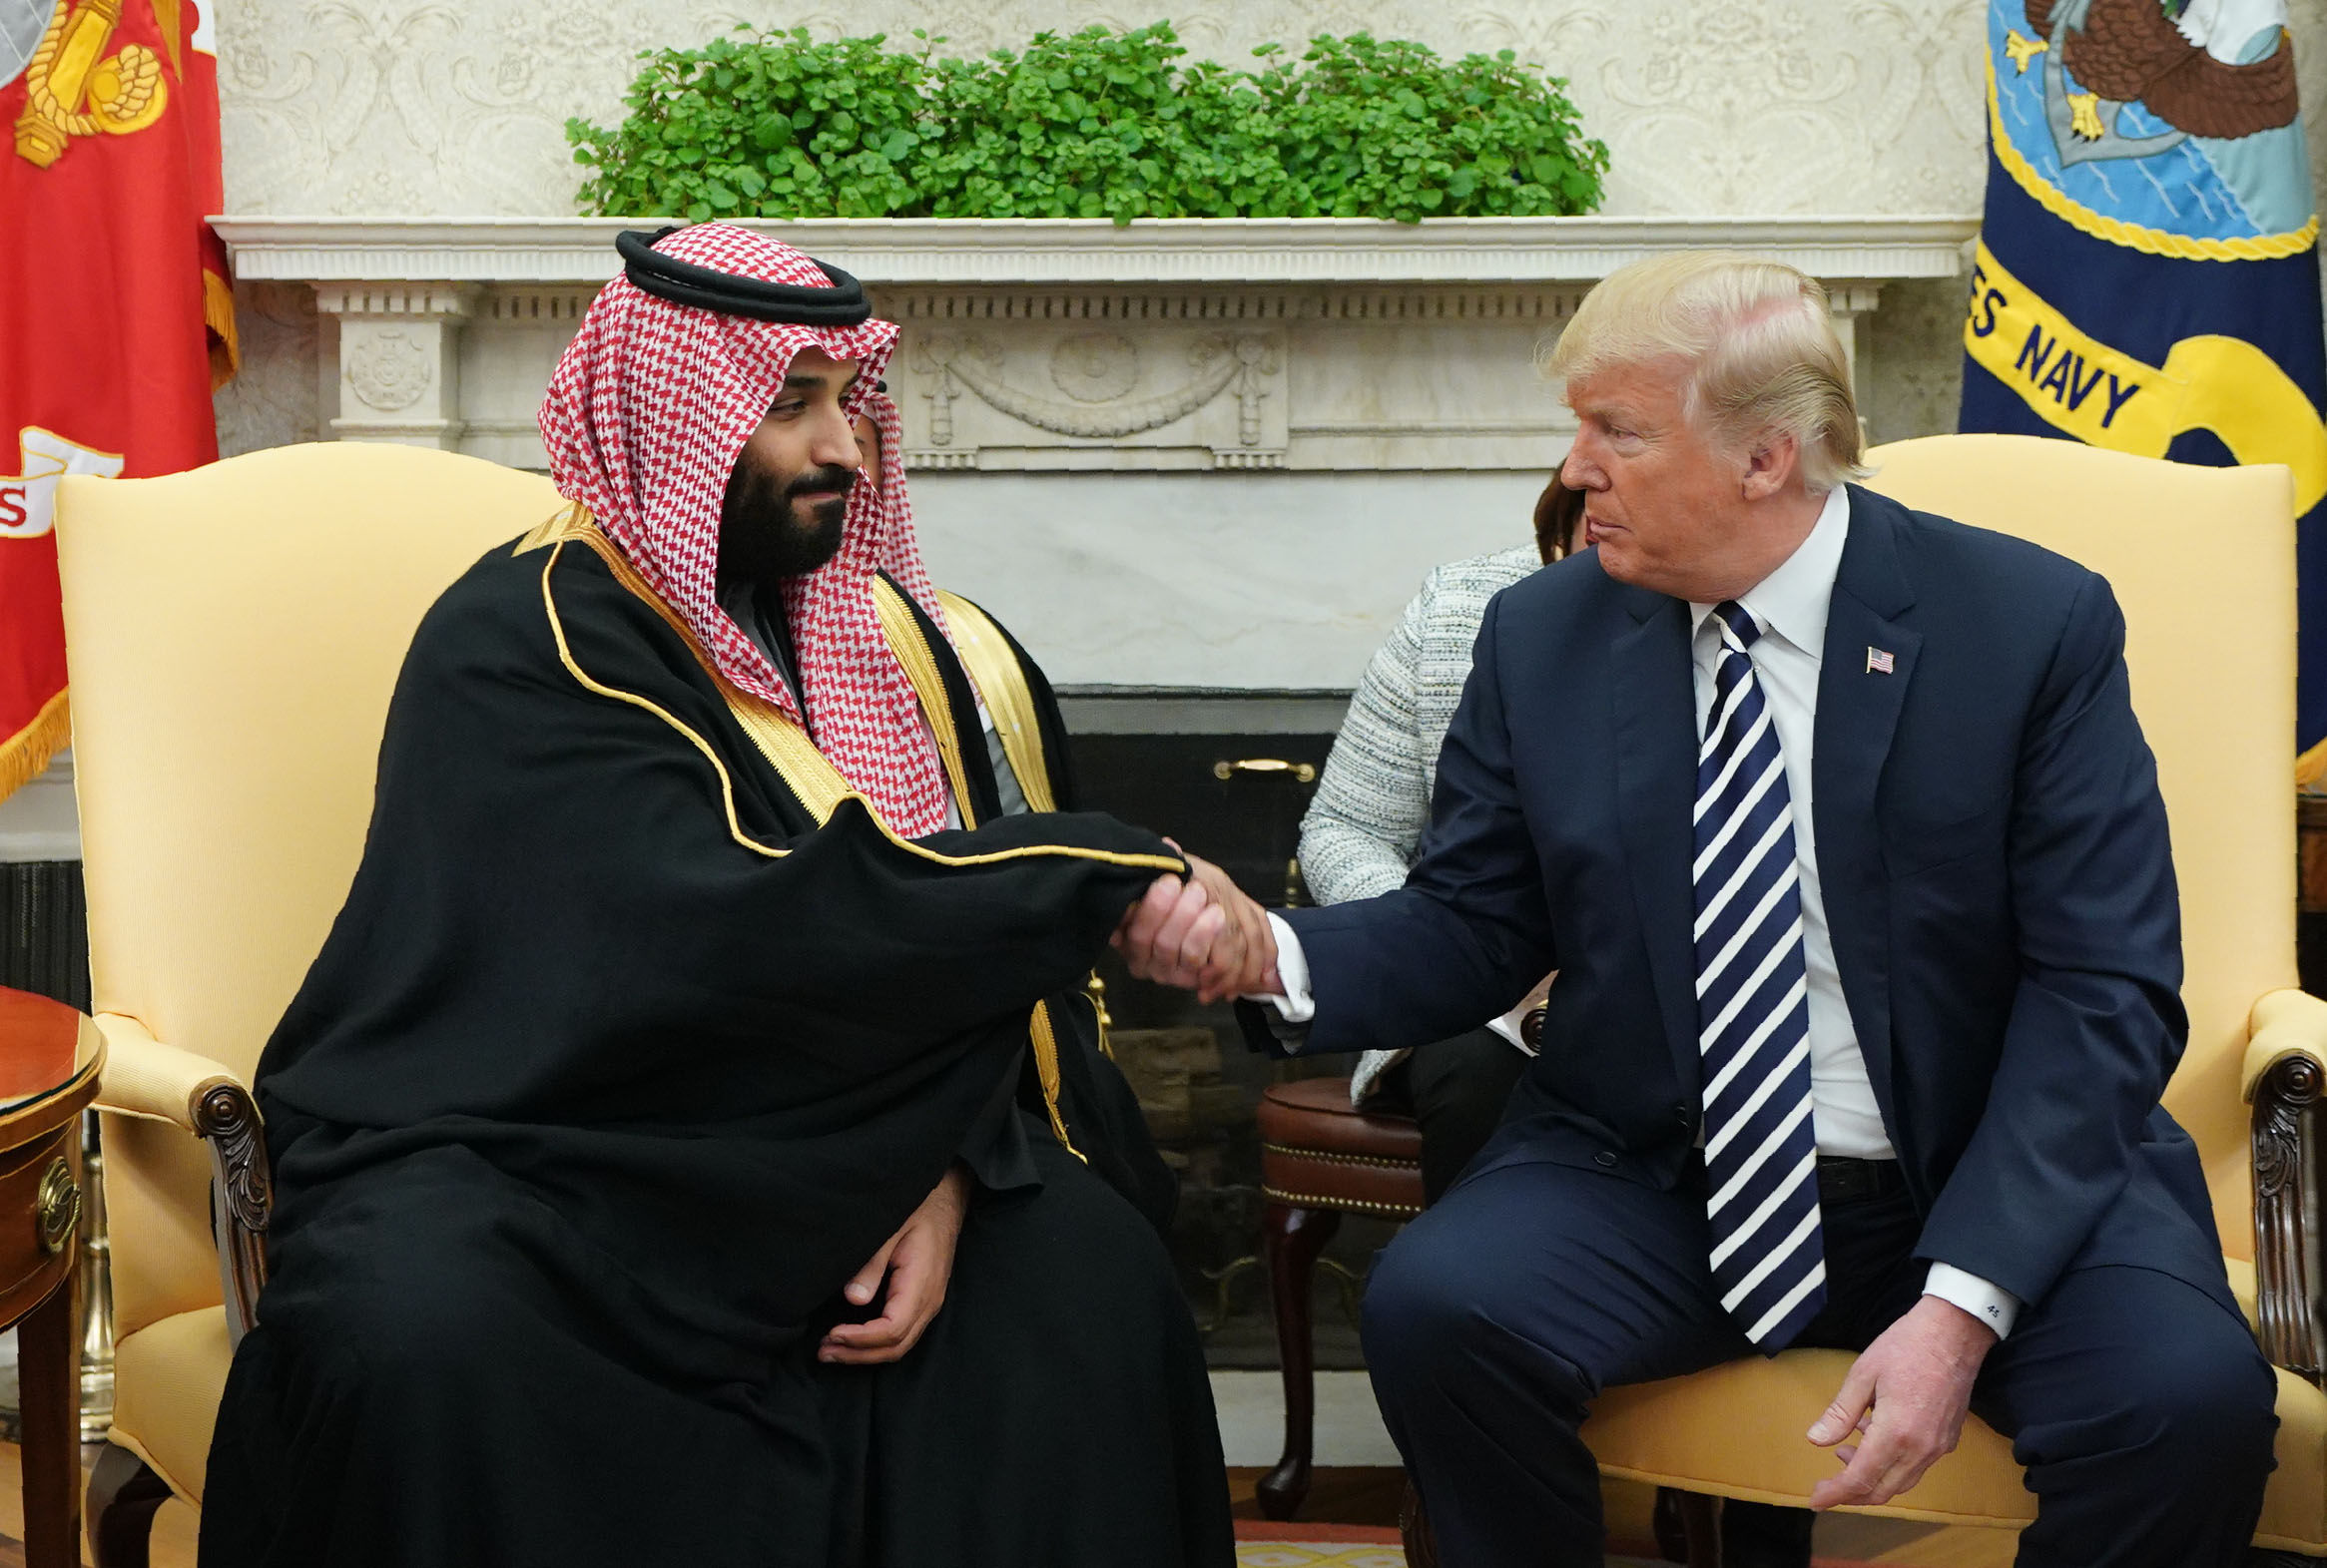 US President Donald Trump (R) shakes hands with Saudi Arabia's Crown Prince Mohammed bin Salman in the Oval Office of the White House on March 20, 2018 in Washington, DC. (Photo by MANDEL NGAN / AFP) (Photo credit should read MANDEL NGAN/AFP via Getty Images)